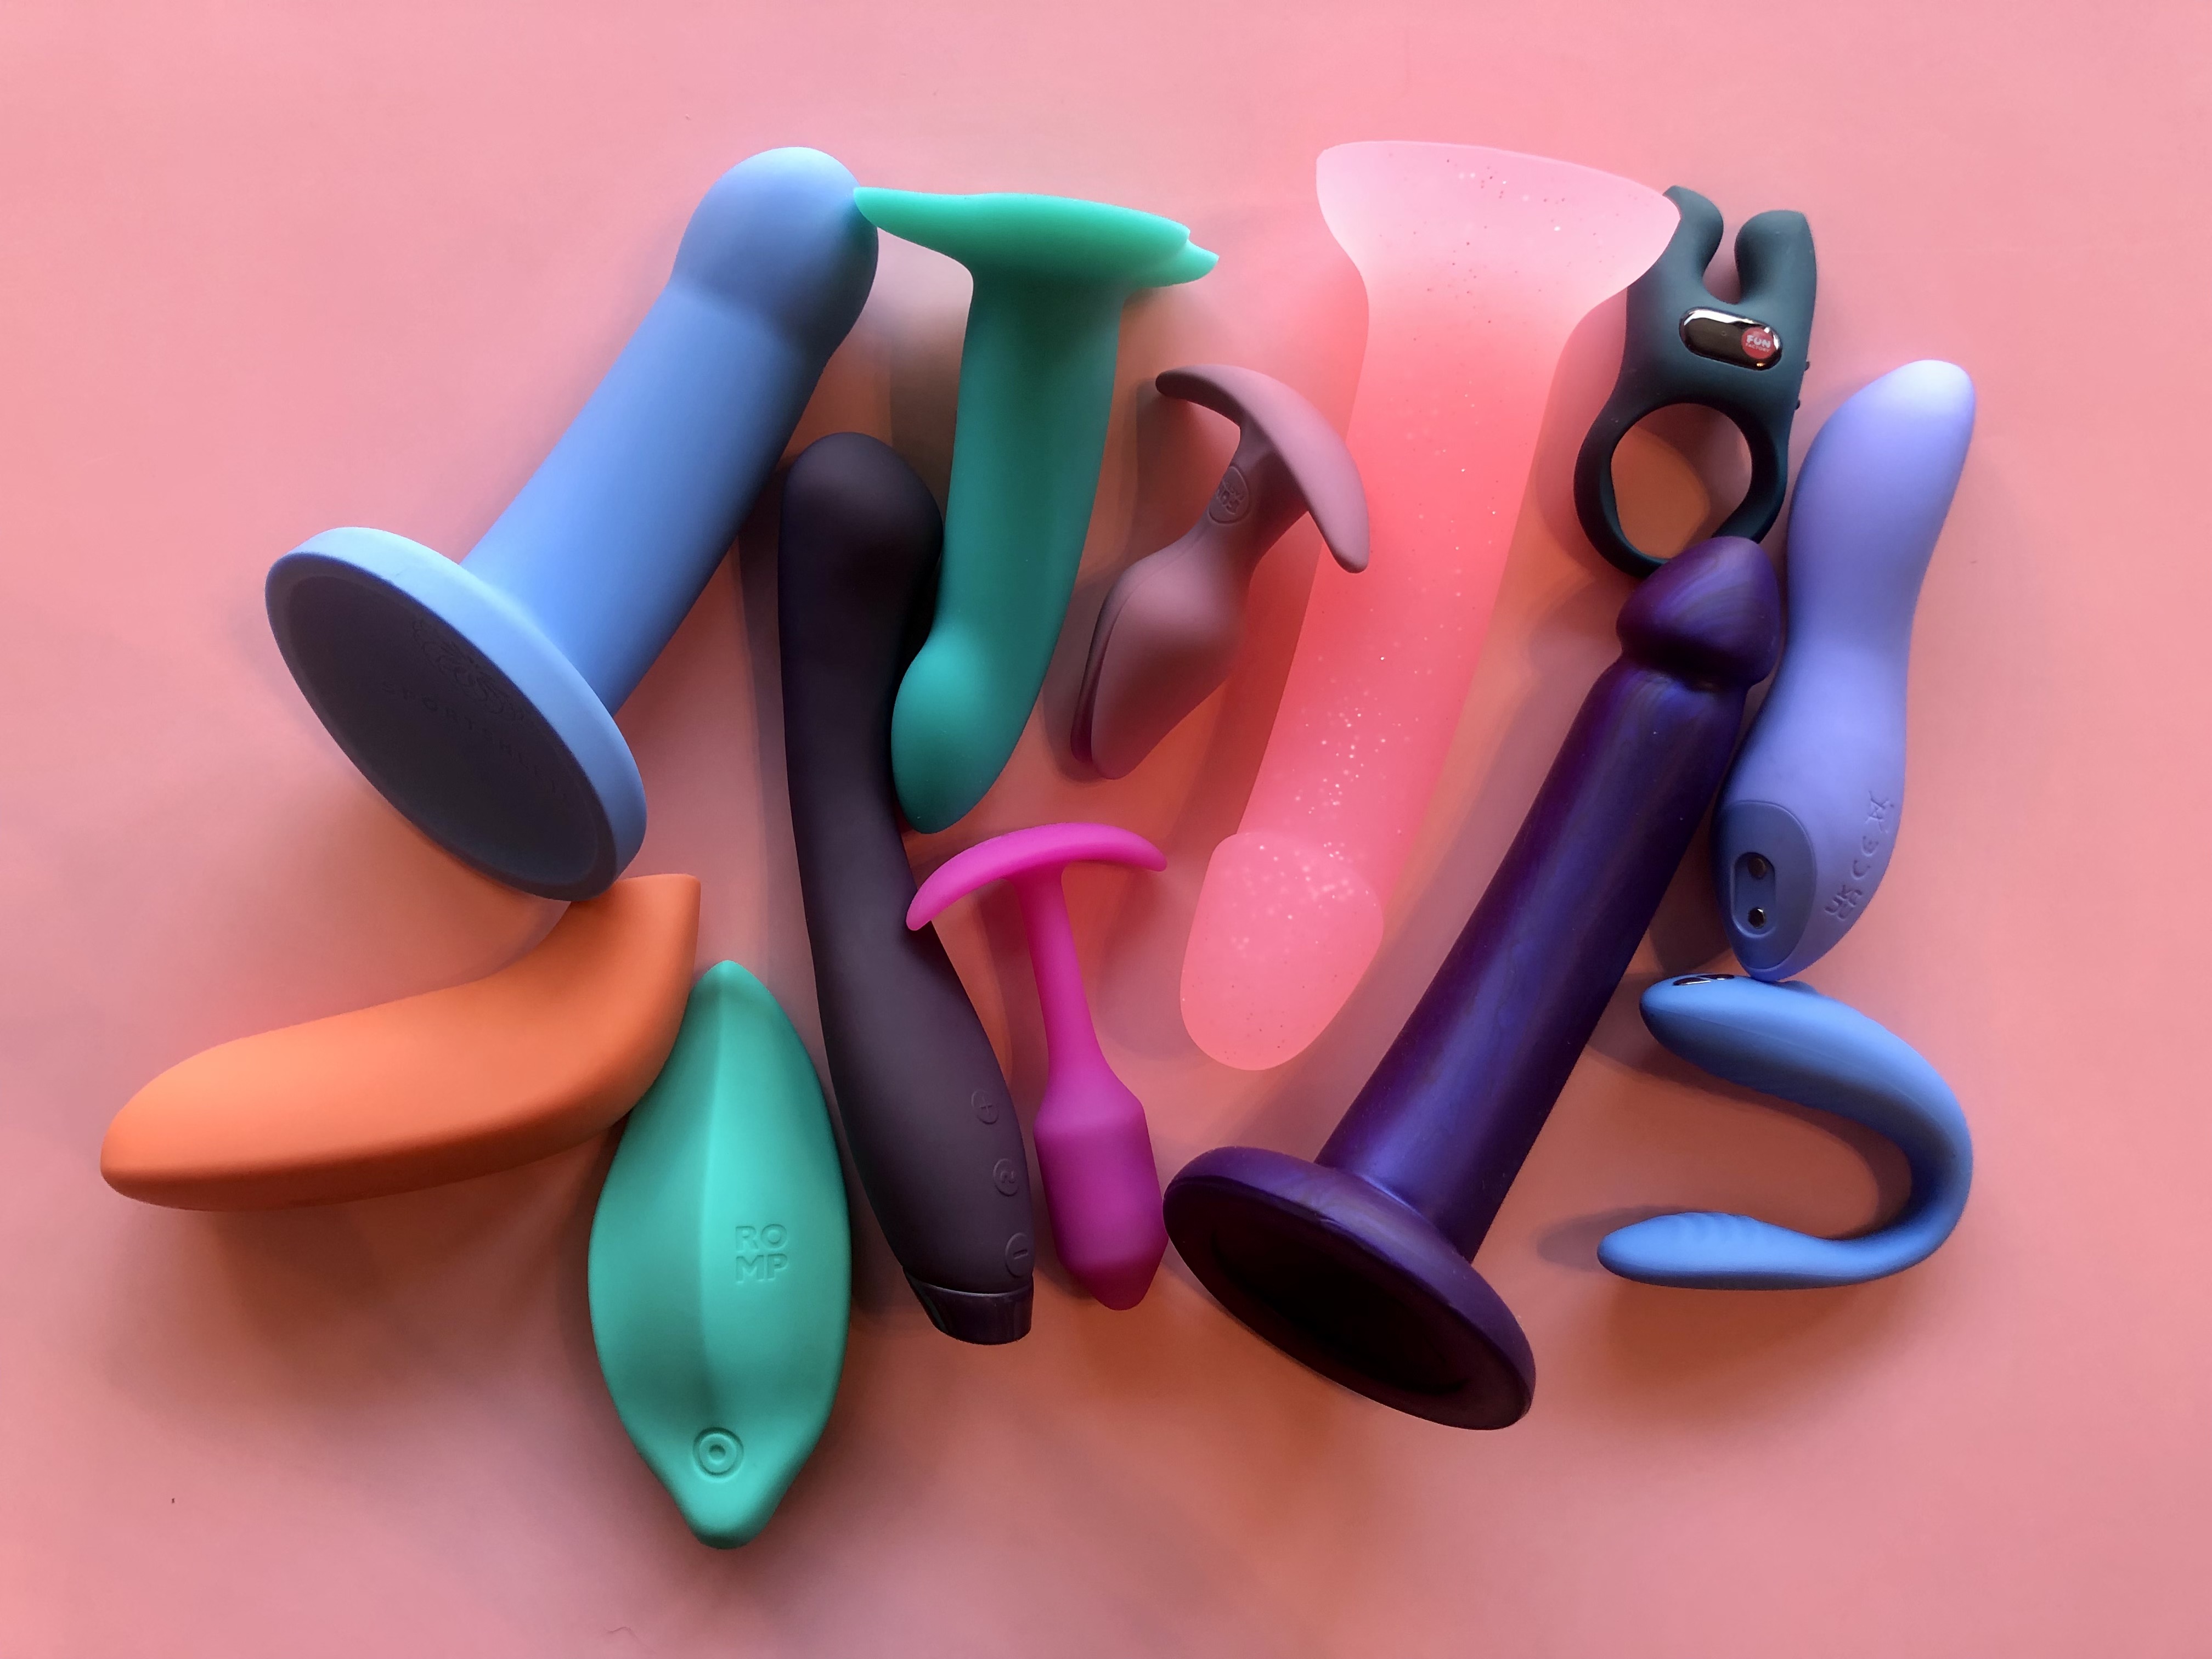 group of various silicone sex toys